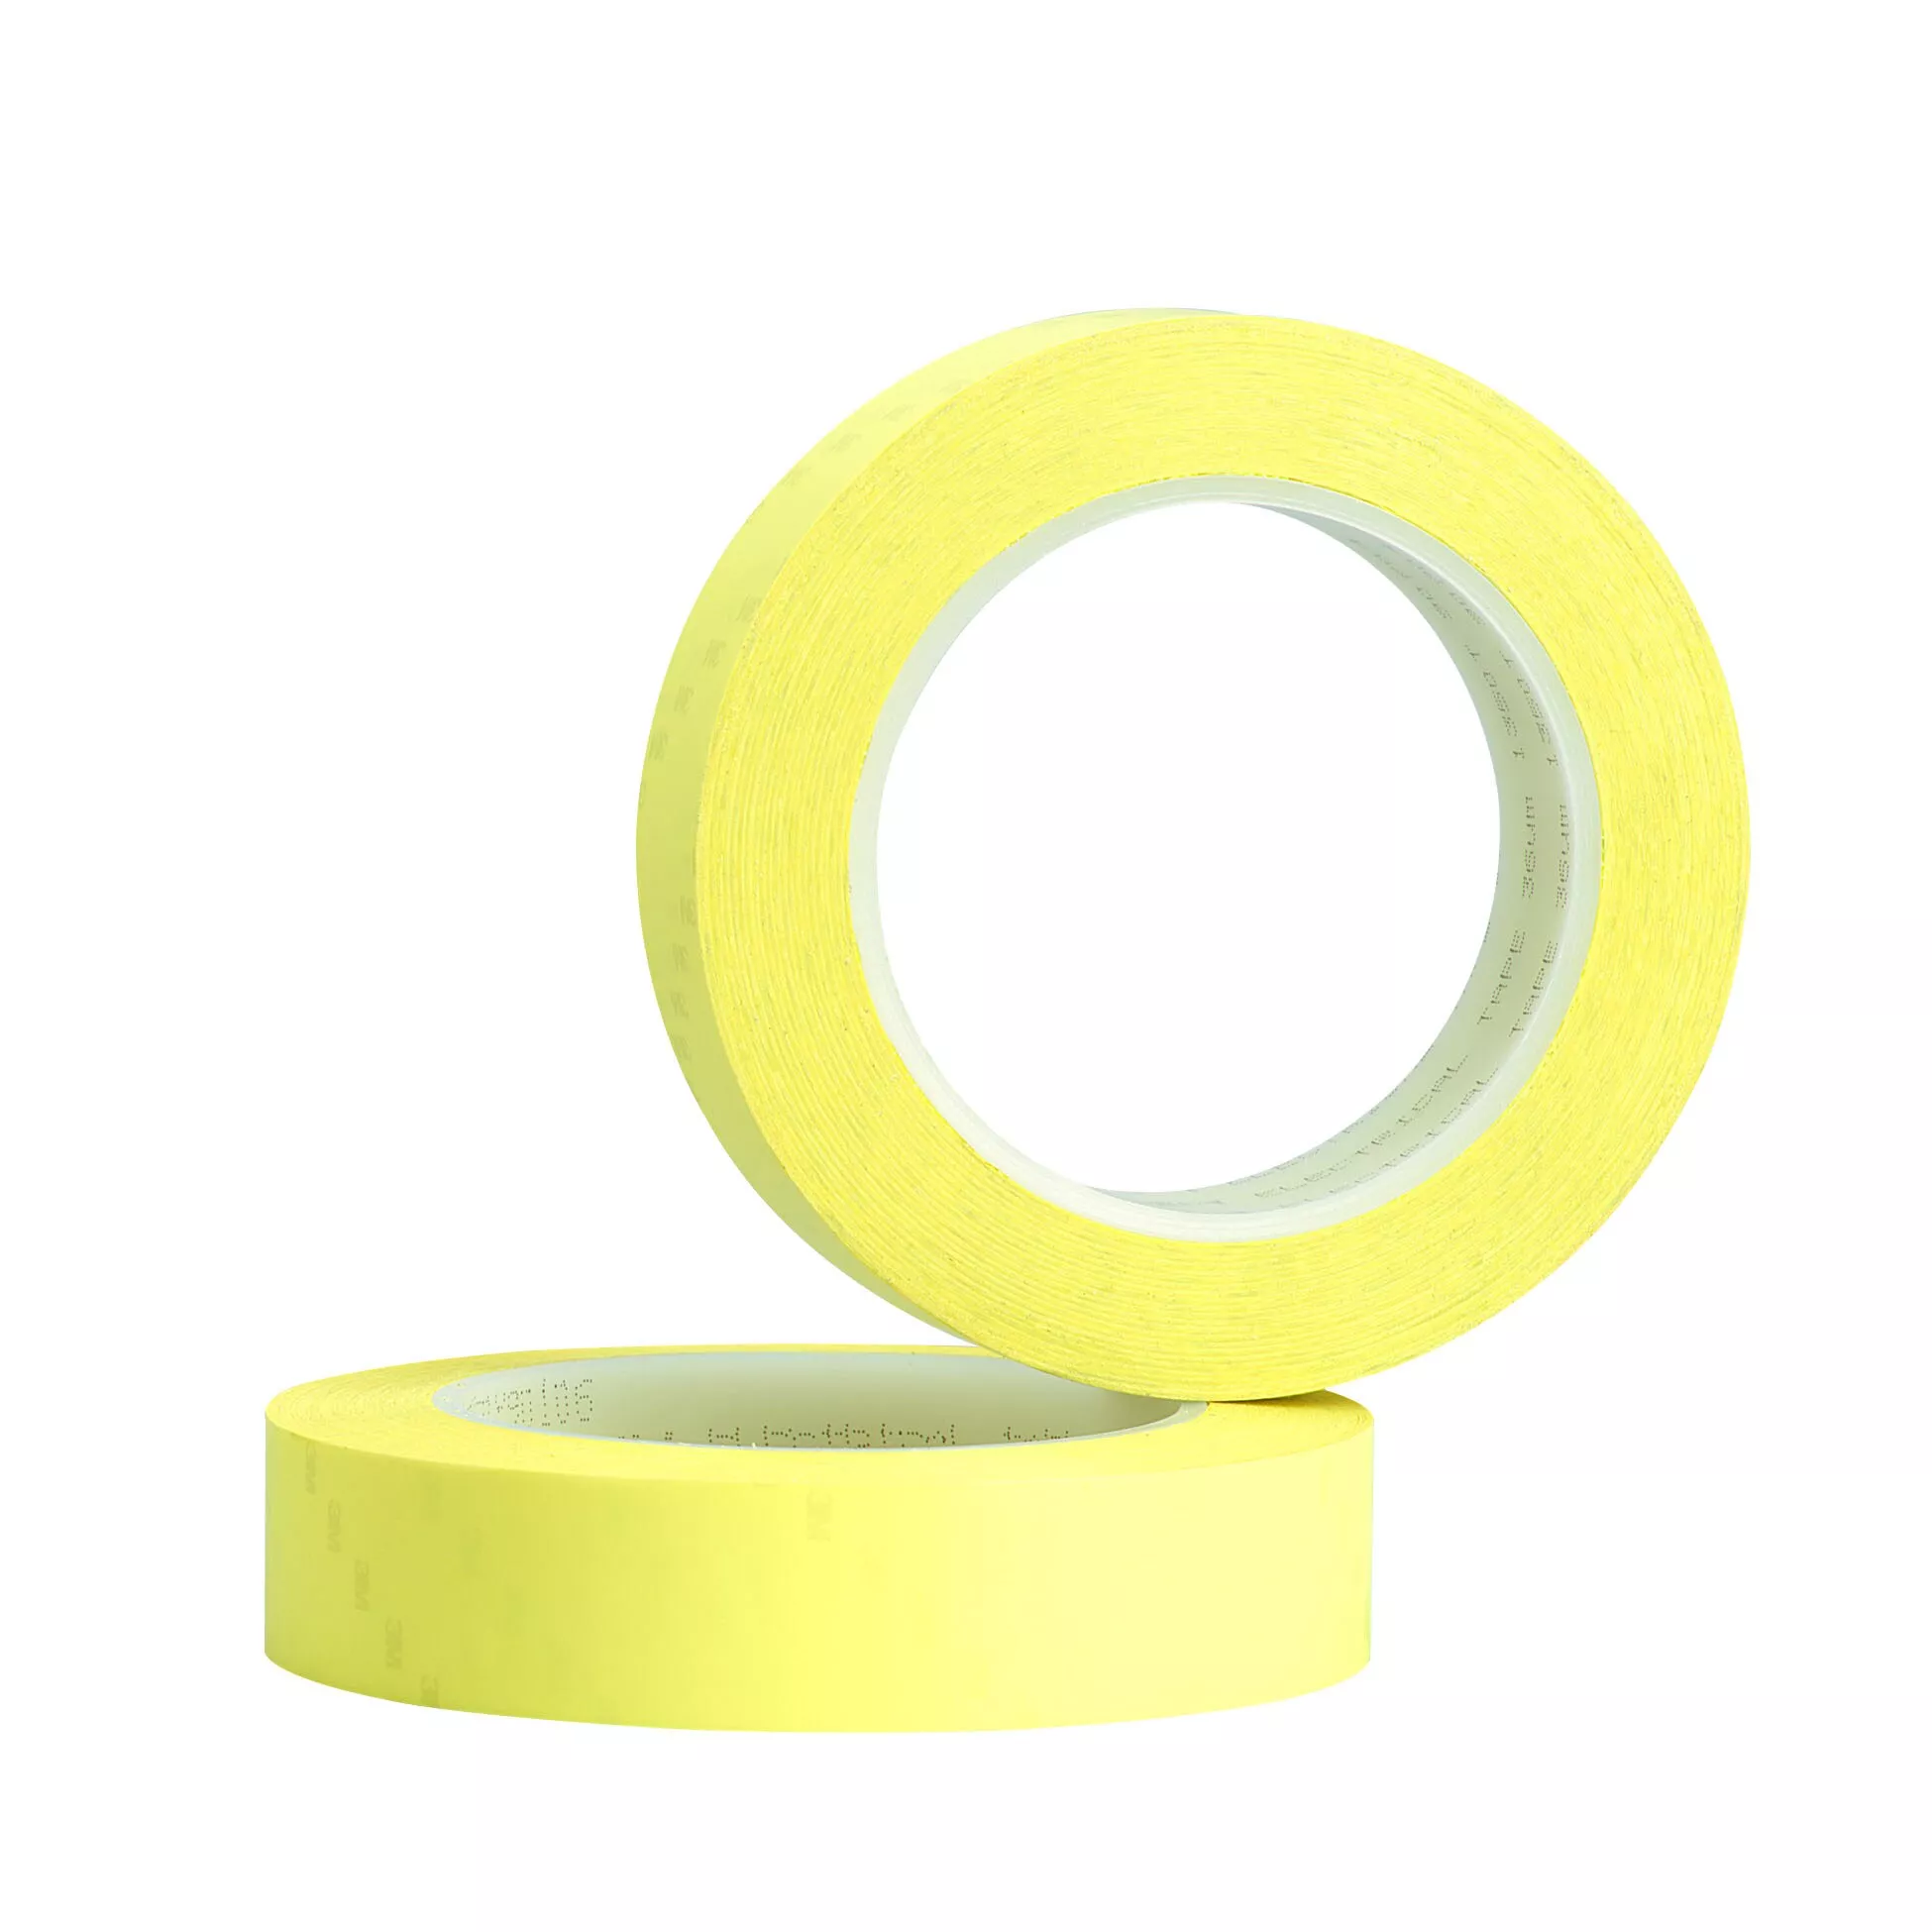 SKU 7010045321 | 3M™ Polyester Film Electrical Tape 57